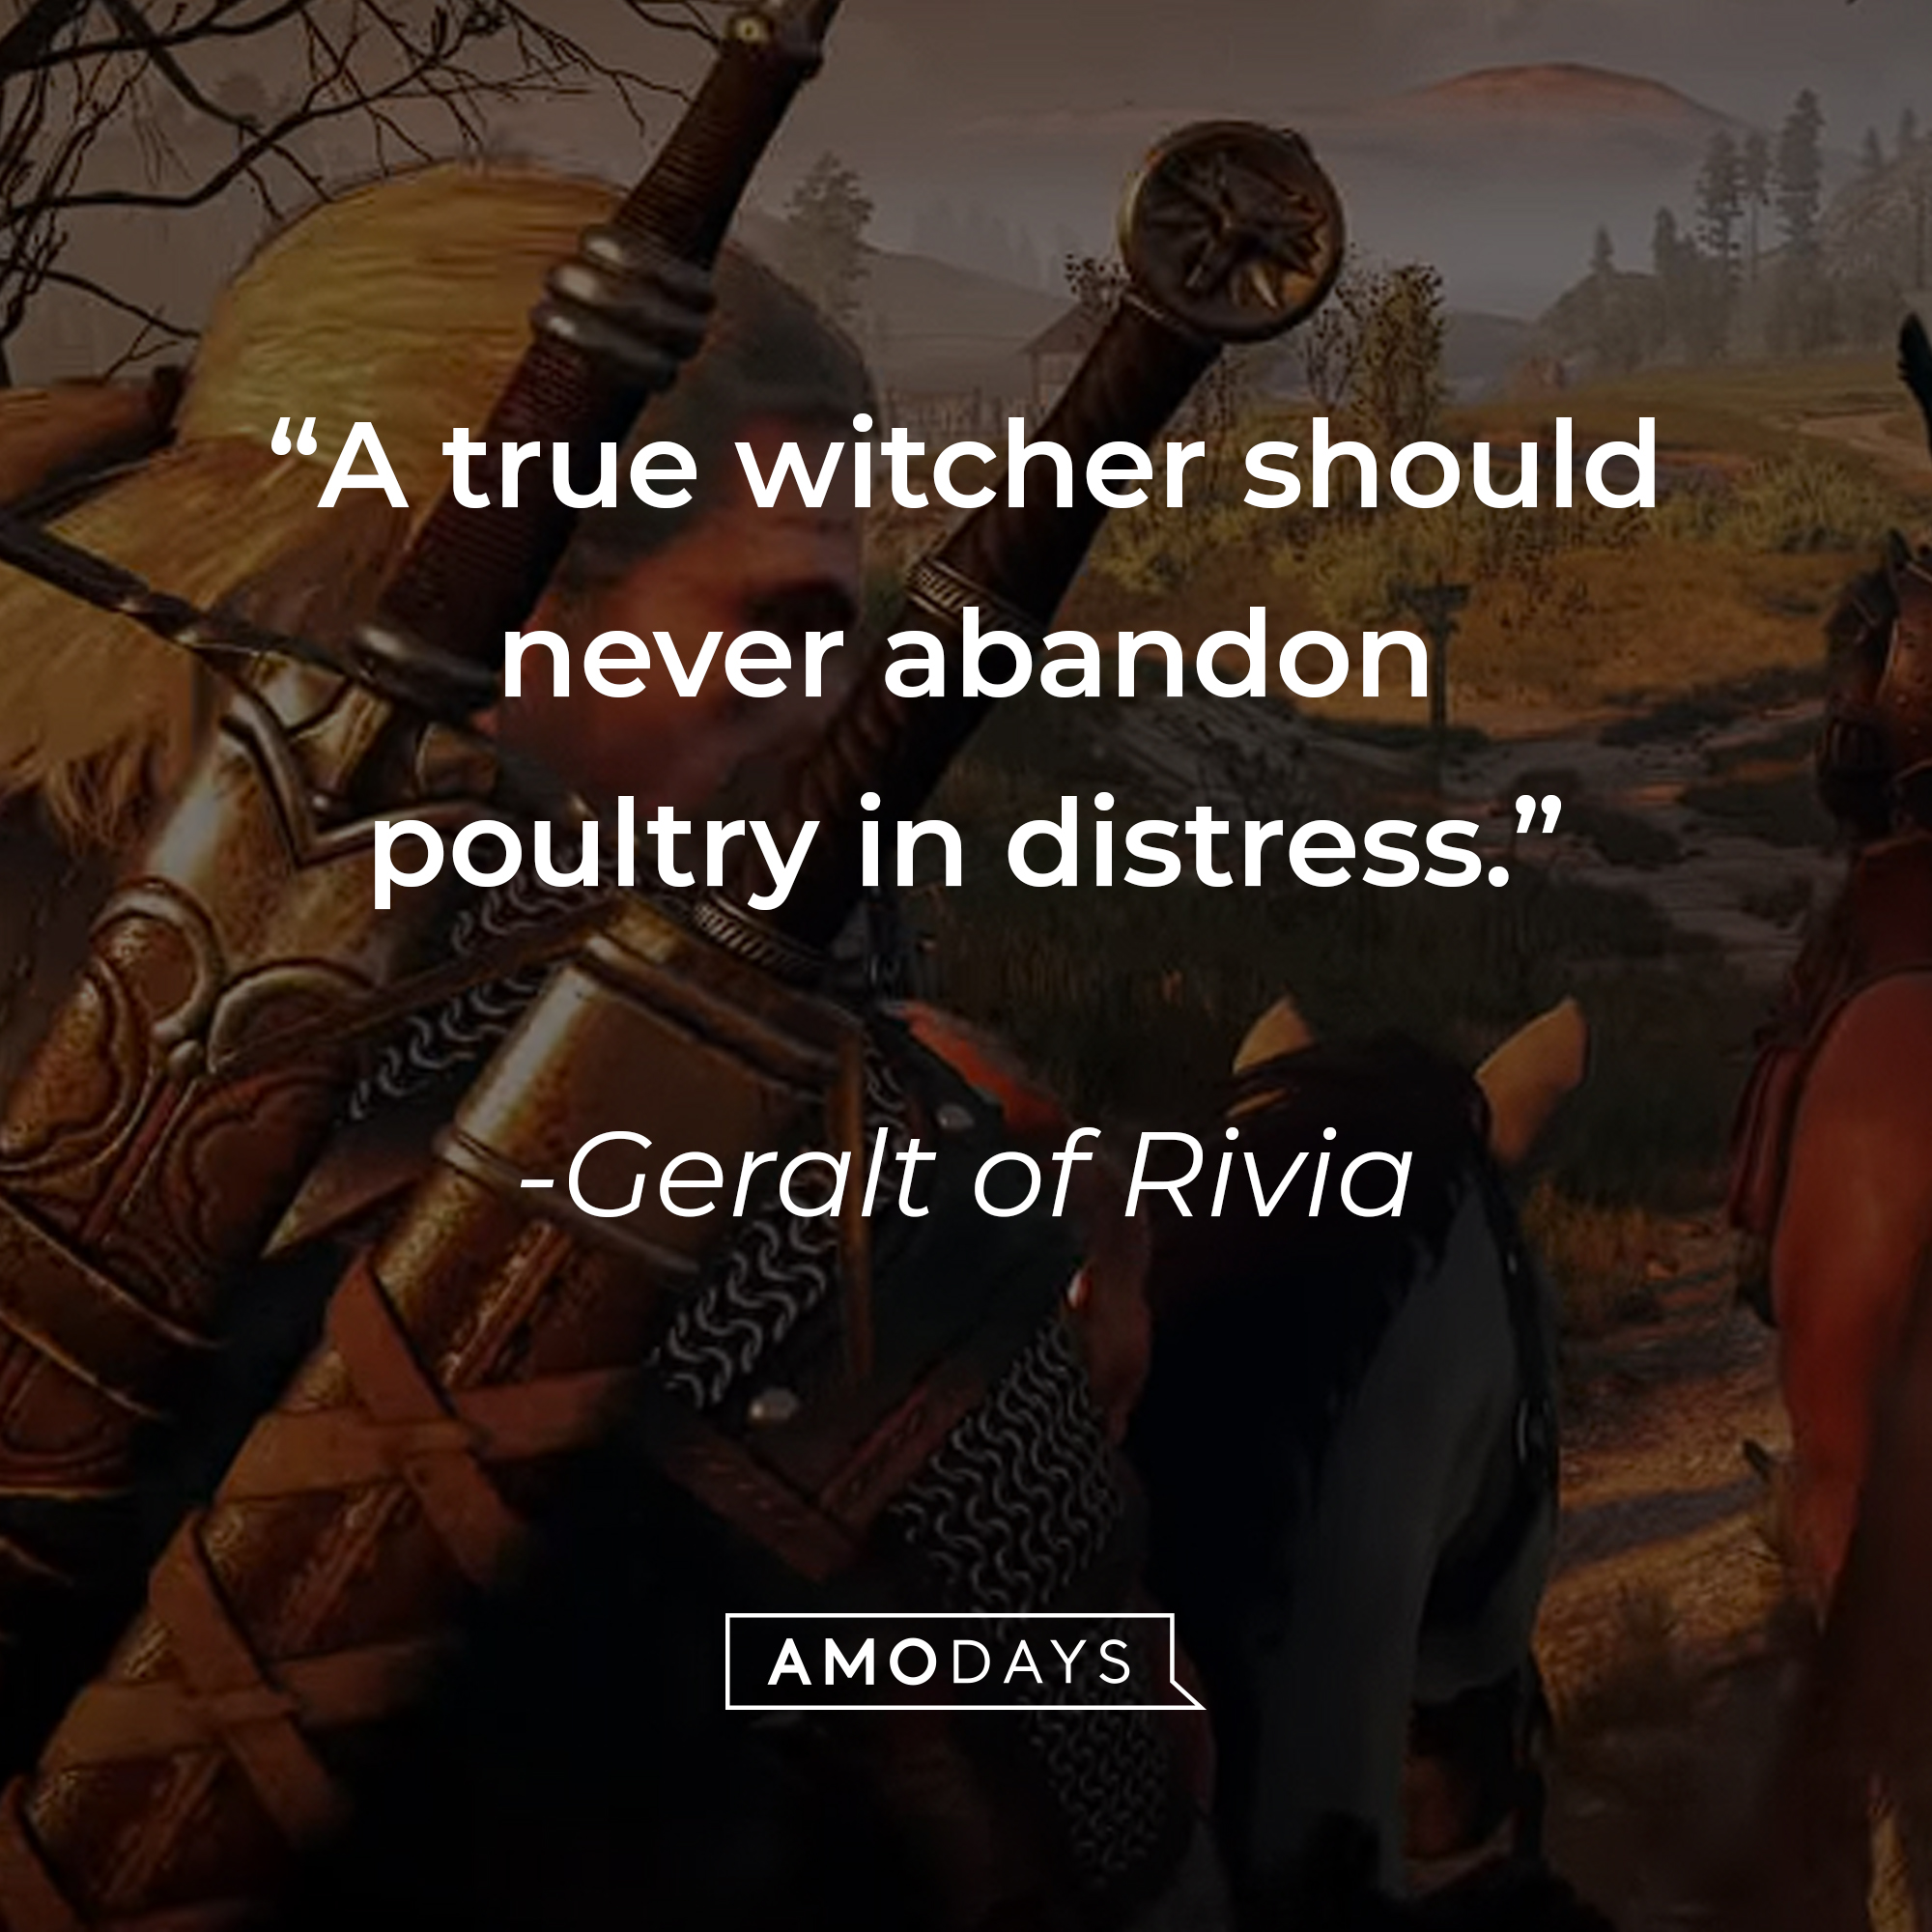 Geralt of Rivia's quote: "A true witcher should never abandon poultry in distress." | Source: youtube.com/CDPRED